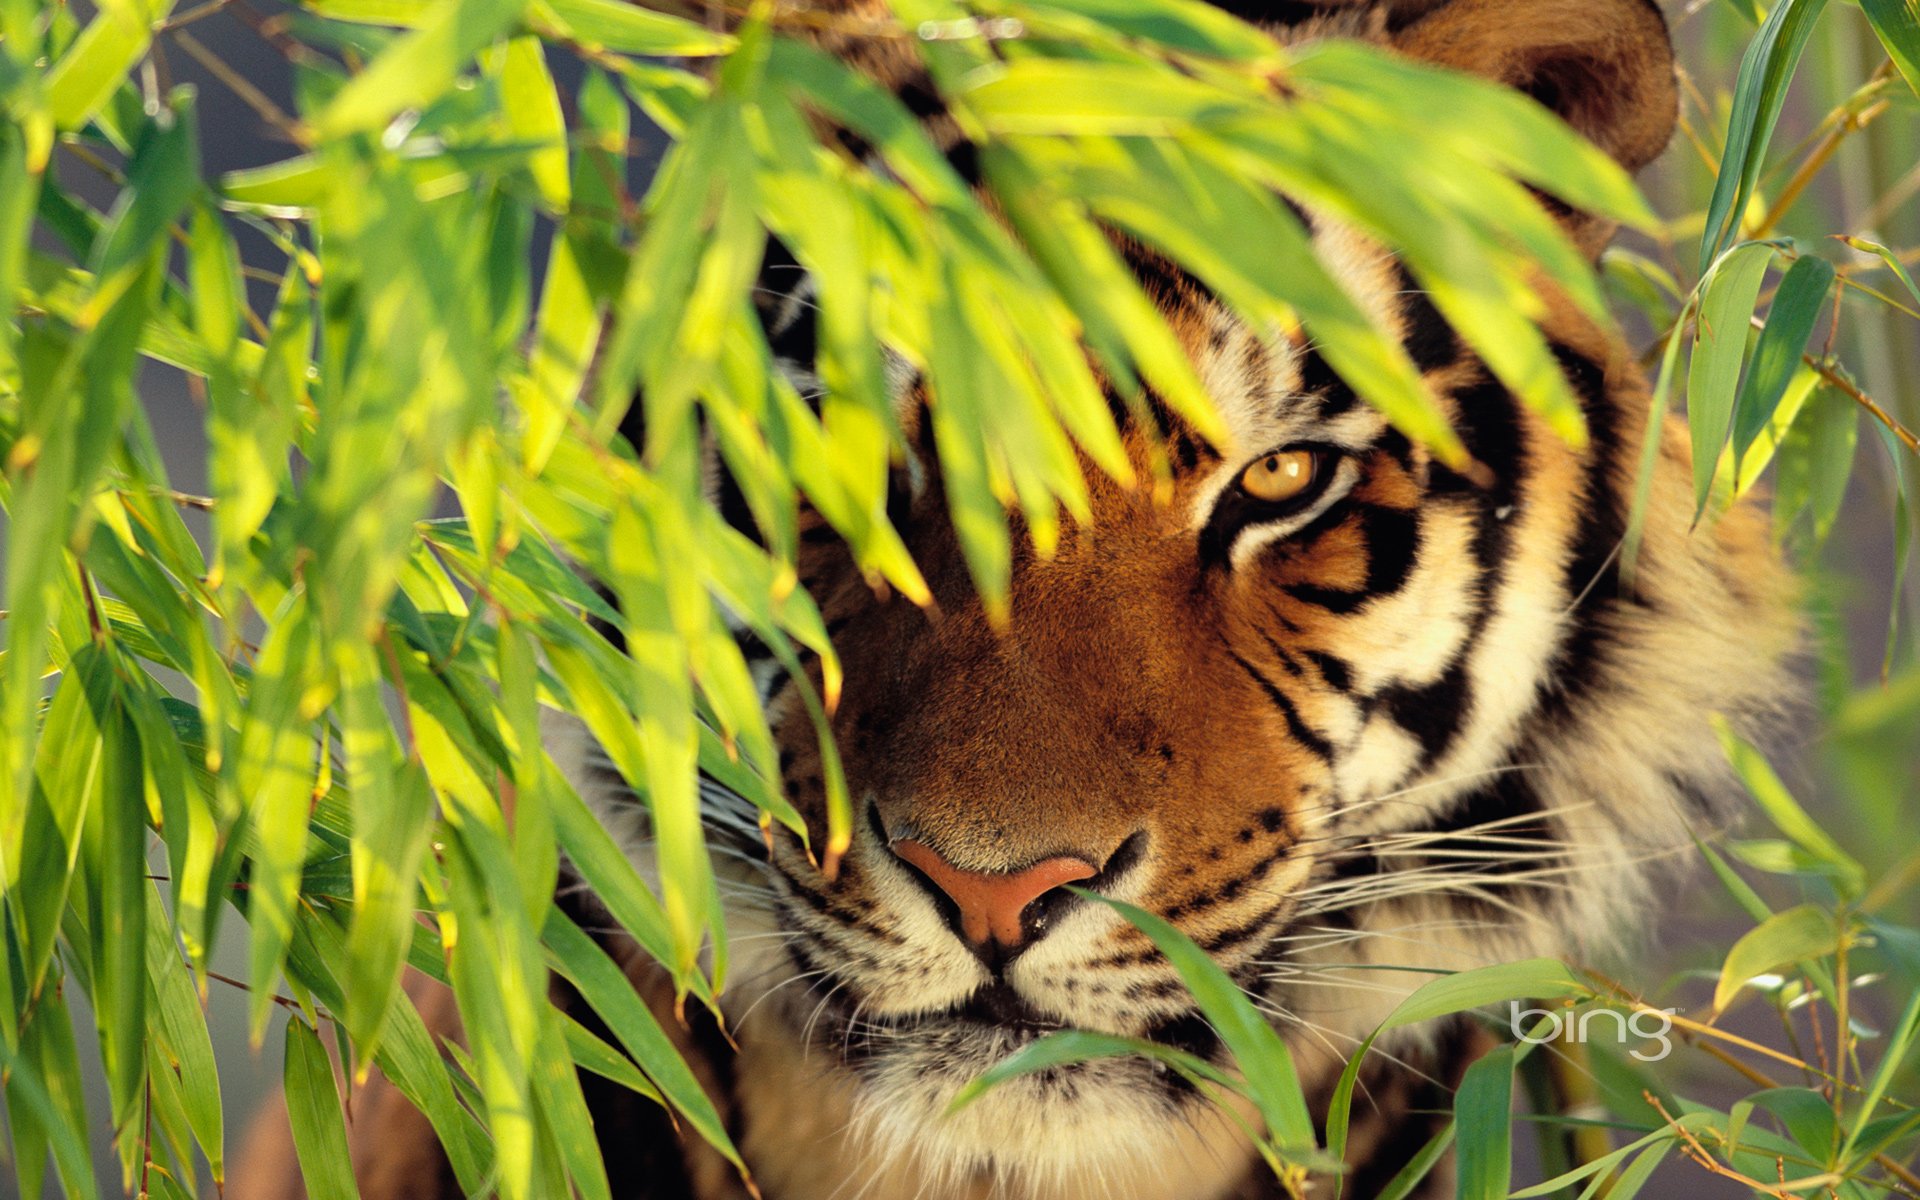  Tiger Bing Background Daily Pics Update HD Wallpapers Download 1920x1200